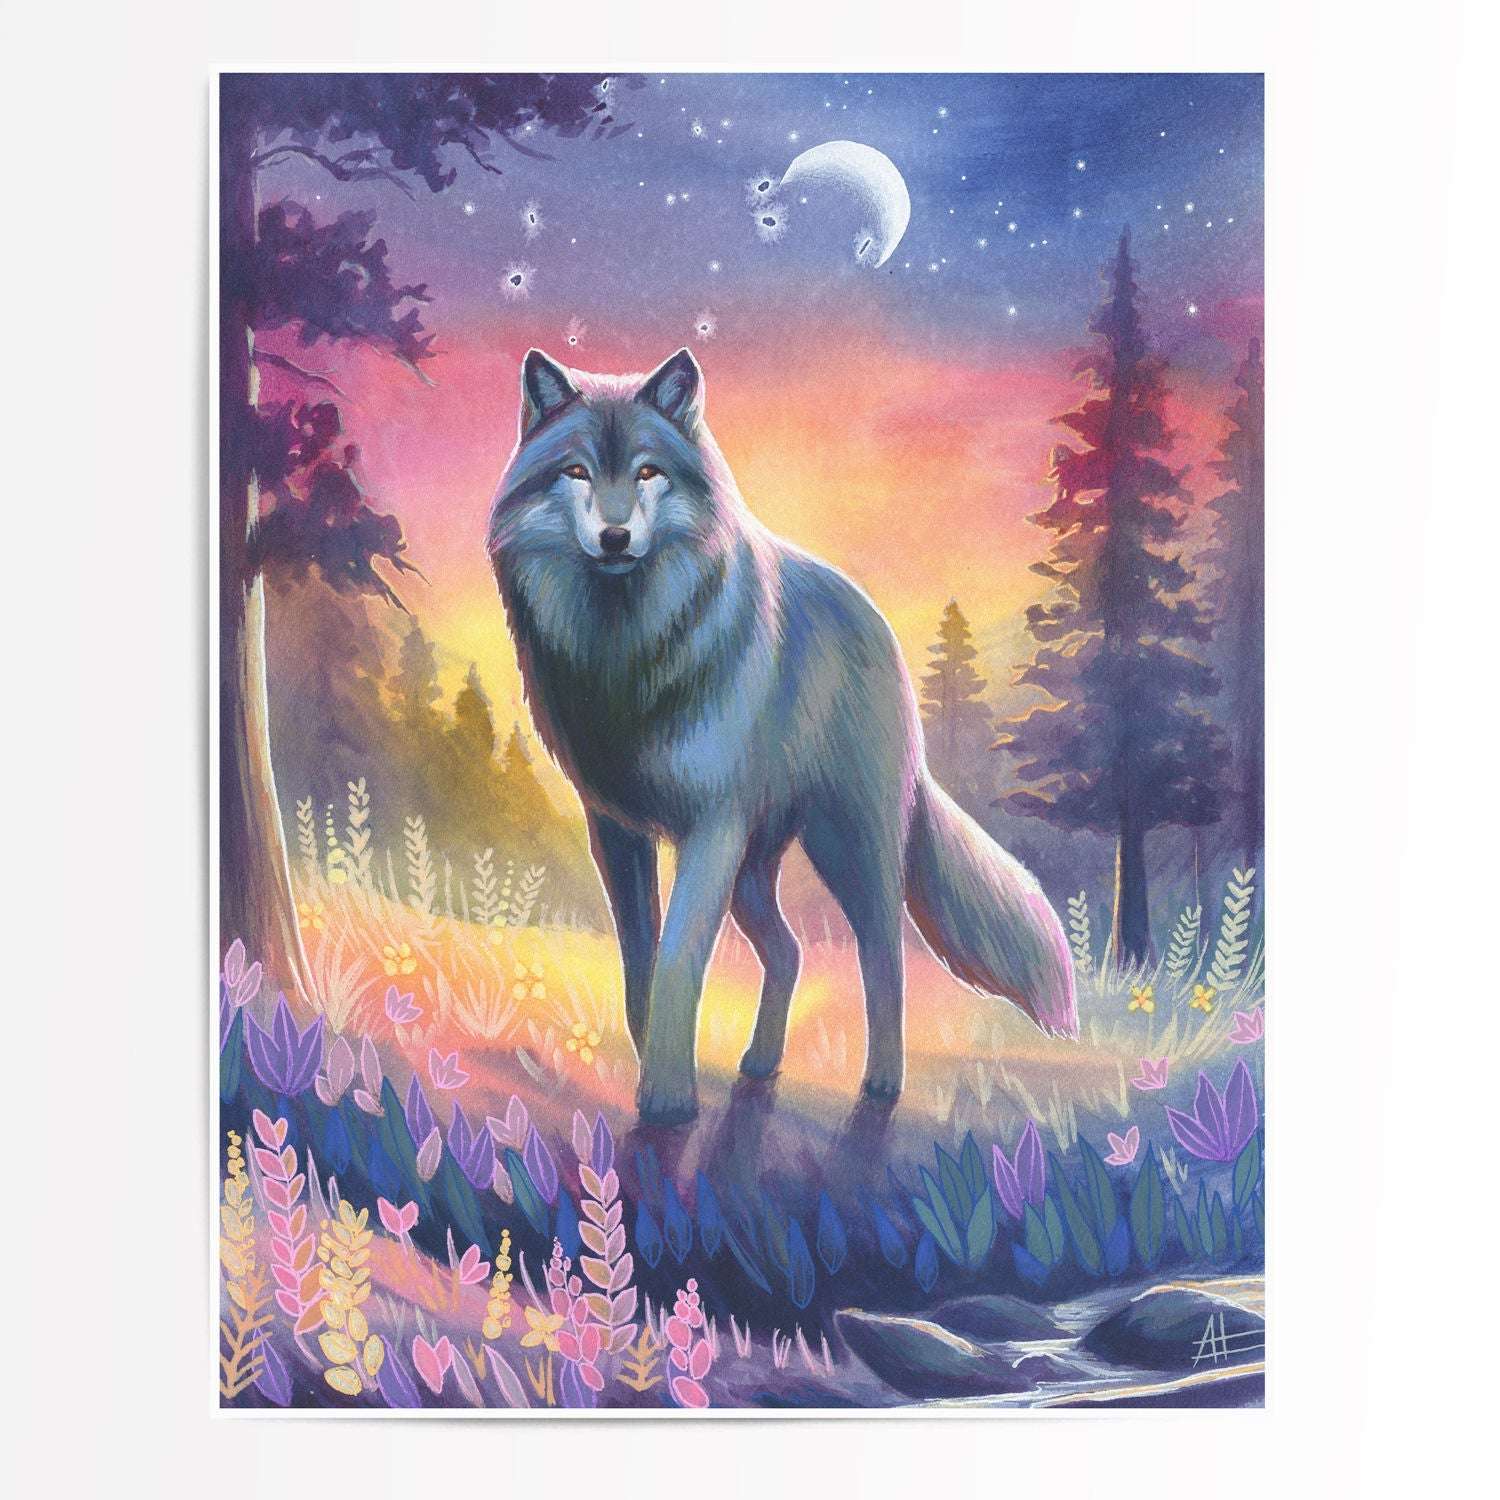 A painting of a wolf standing in a forest at twilight with a vibrant sky and crescent moon overhead.
Product Name: Twilight Watch - Fine Art Print Bundle